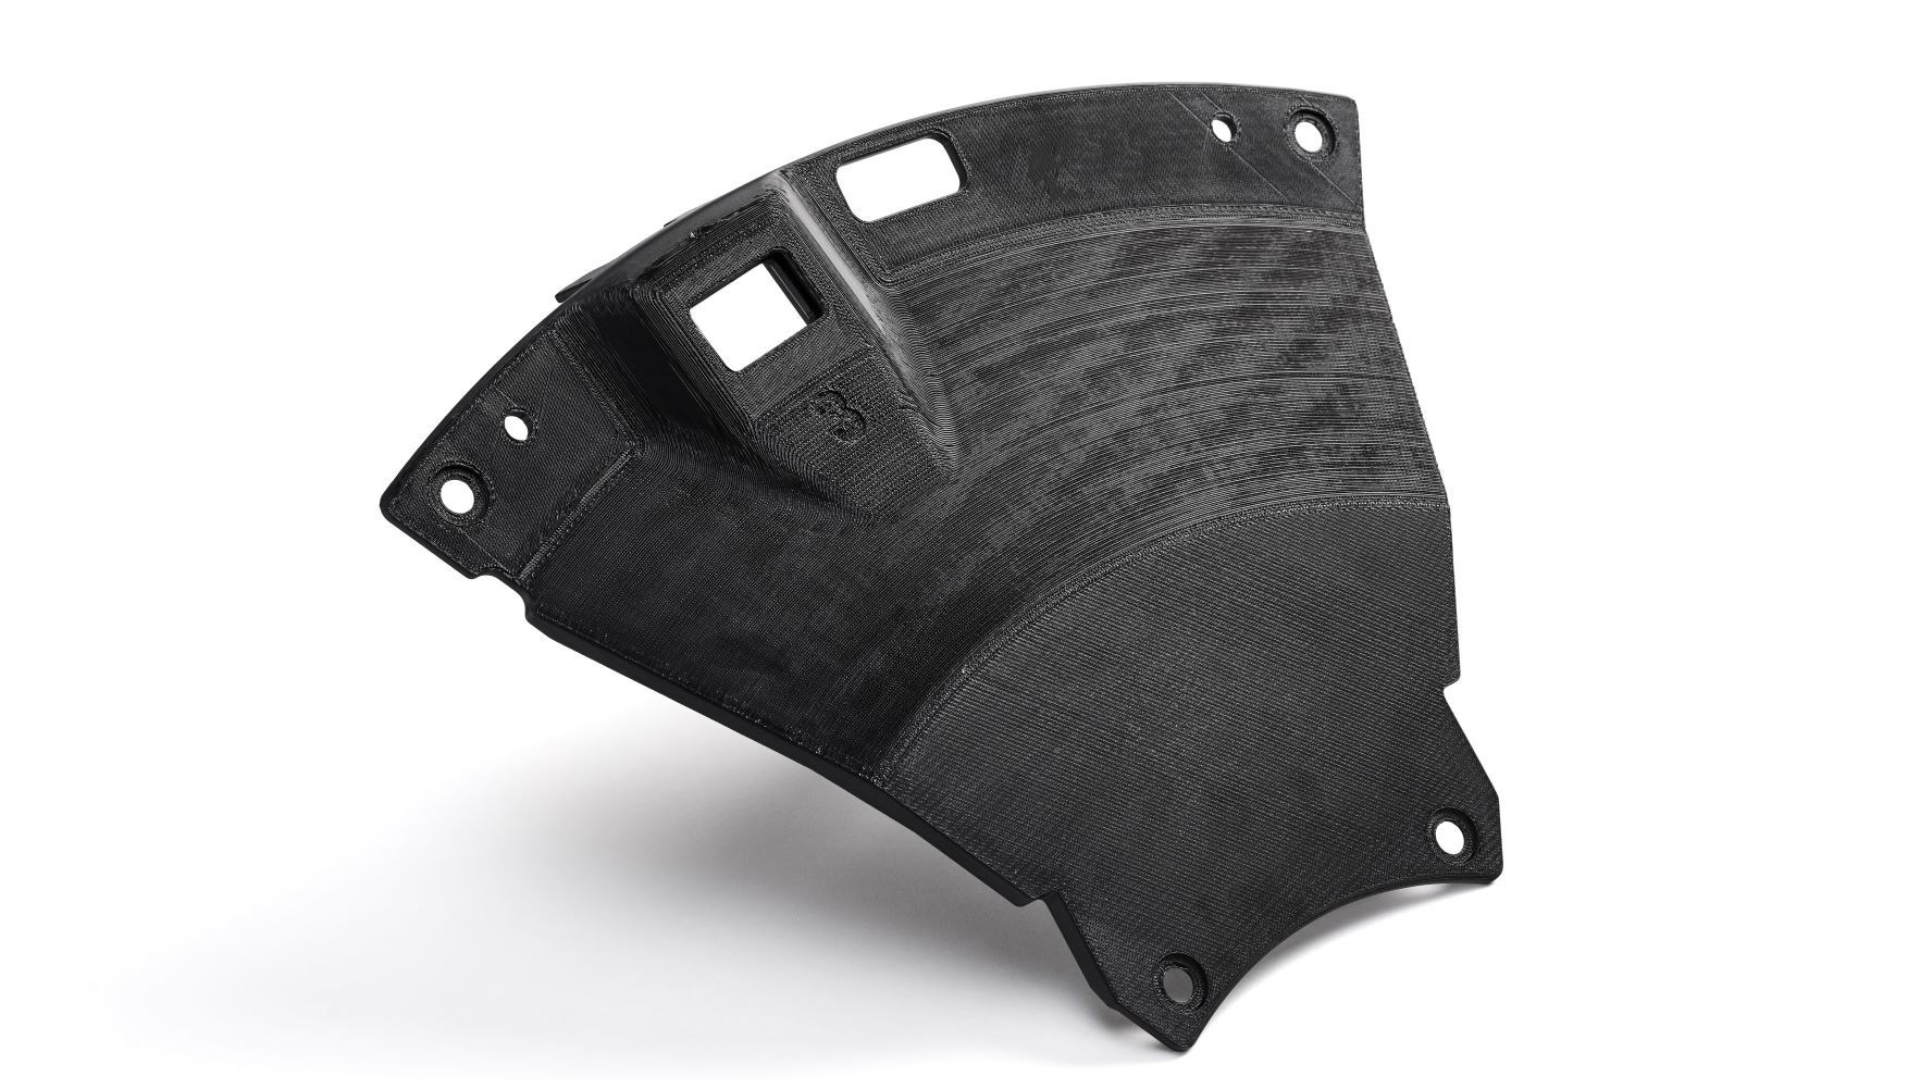 Hexagon and Stratasys have applied simulation technology to PEKK materials and additive manufacturing processes for lightweighting..